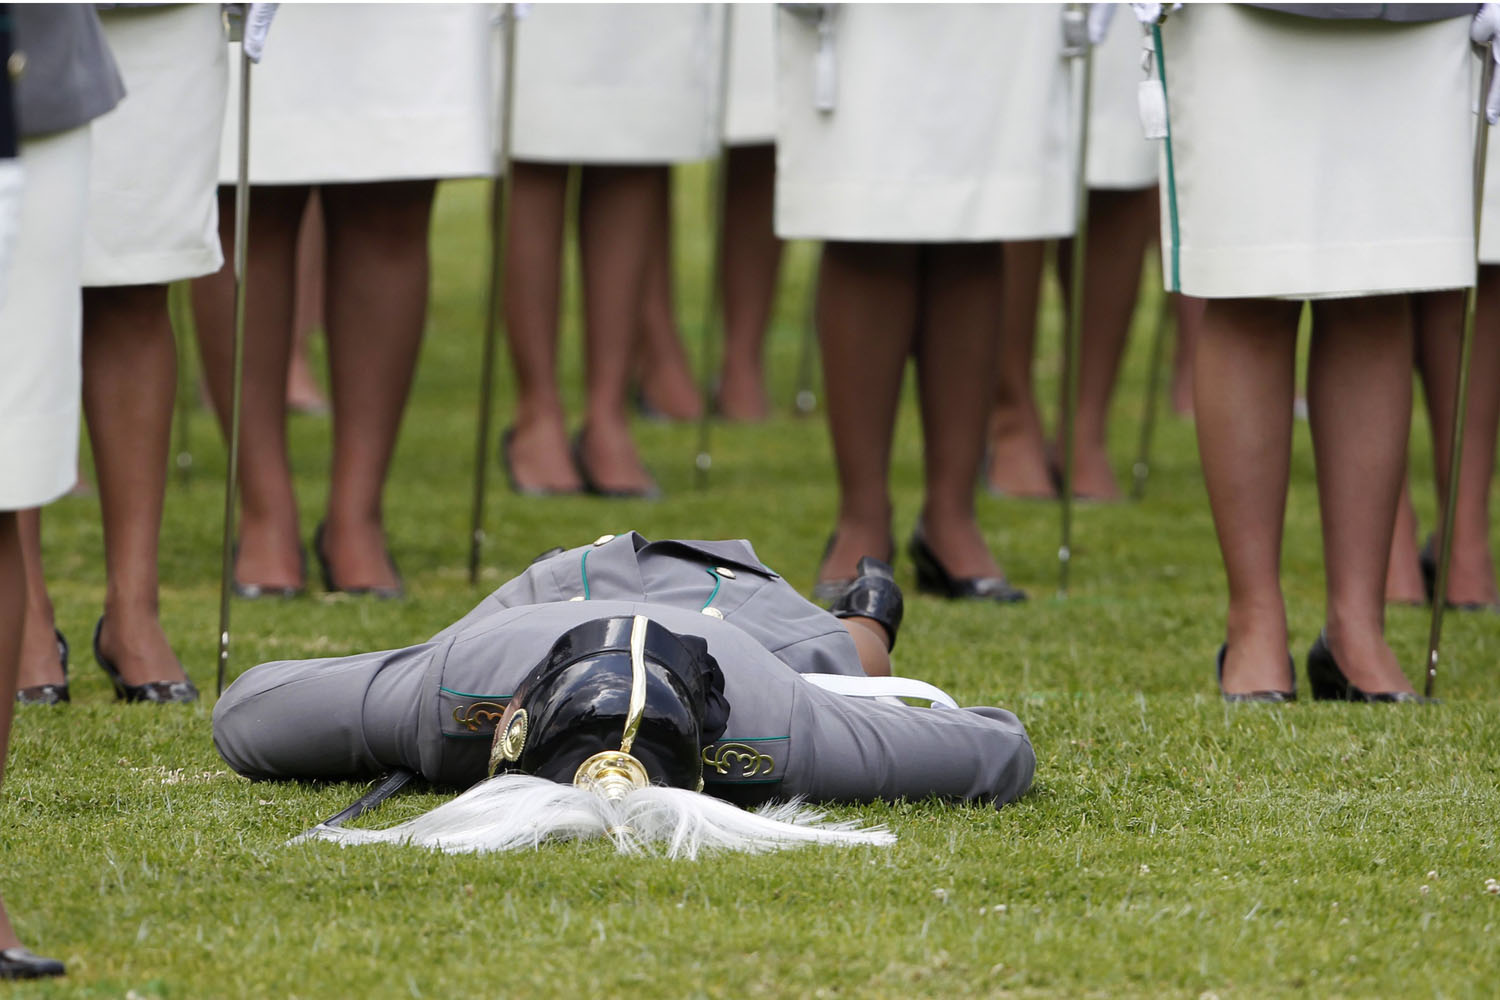 Image: Nov. 2, 2012. A cadet lies on the grass after collapsing during an annual ceremony for graduating cadets at the police school in Bogota.